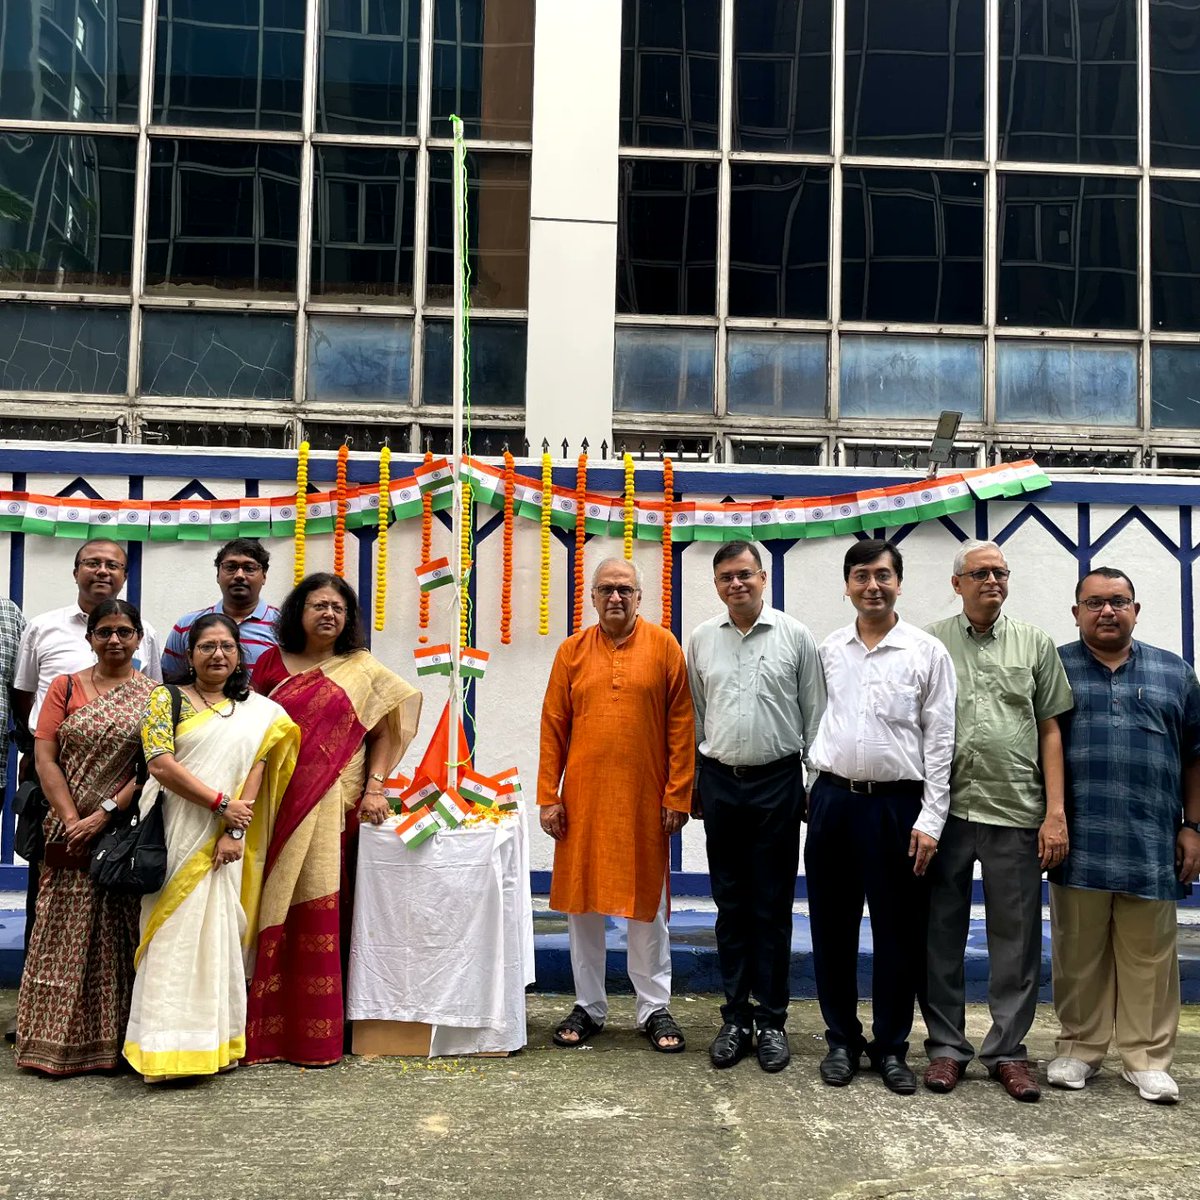 The essence of being a true Indian is in the togetherness!

Here are the glimpses of Independence Day Celebration at IBS Kolkata.🇮🇳🇮🇳🇮🇳

#ibs #ibsindia #icfai #ibskolkata #IndependenceDay #ProudToCelebrate #FreedomFest #CollegeSpirit  #ProudToBeIndian #FreedomCelebration